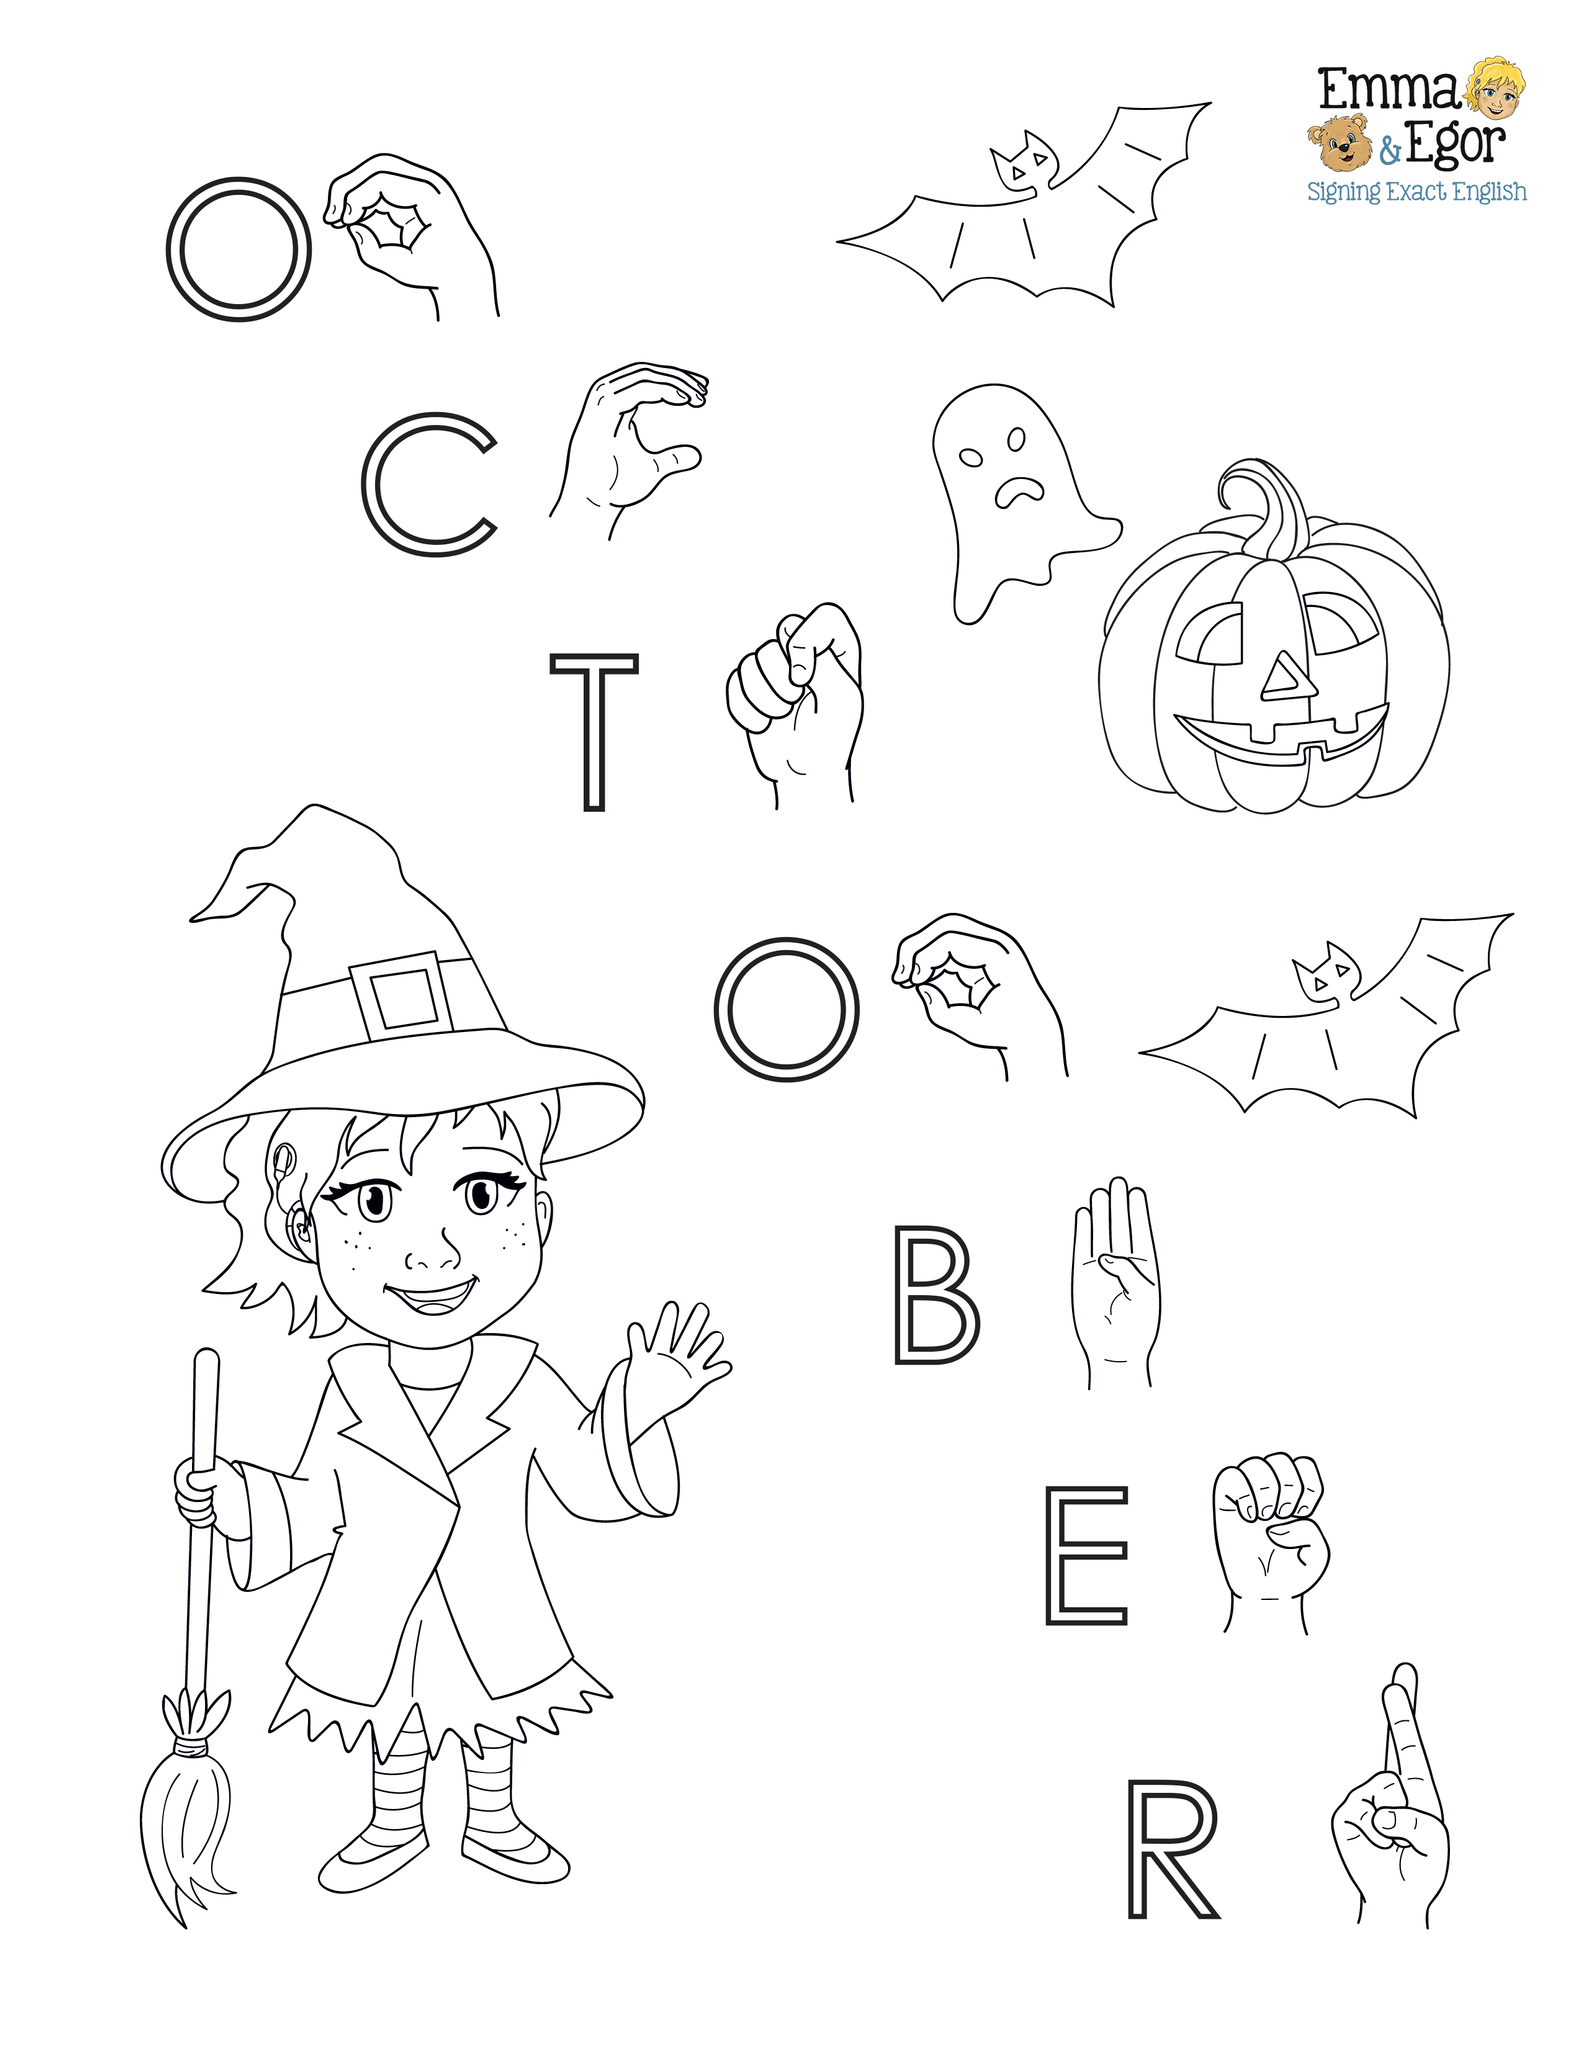 How to sign october